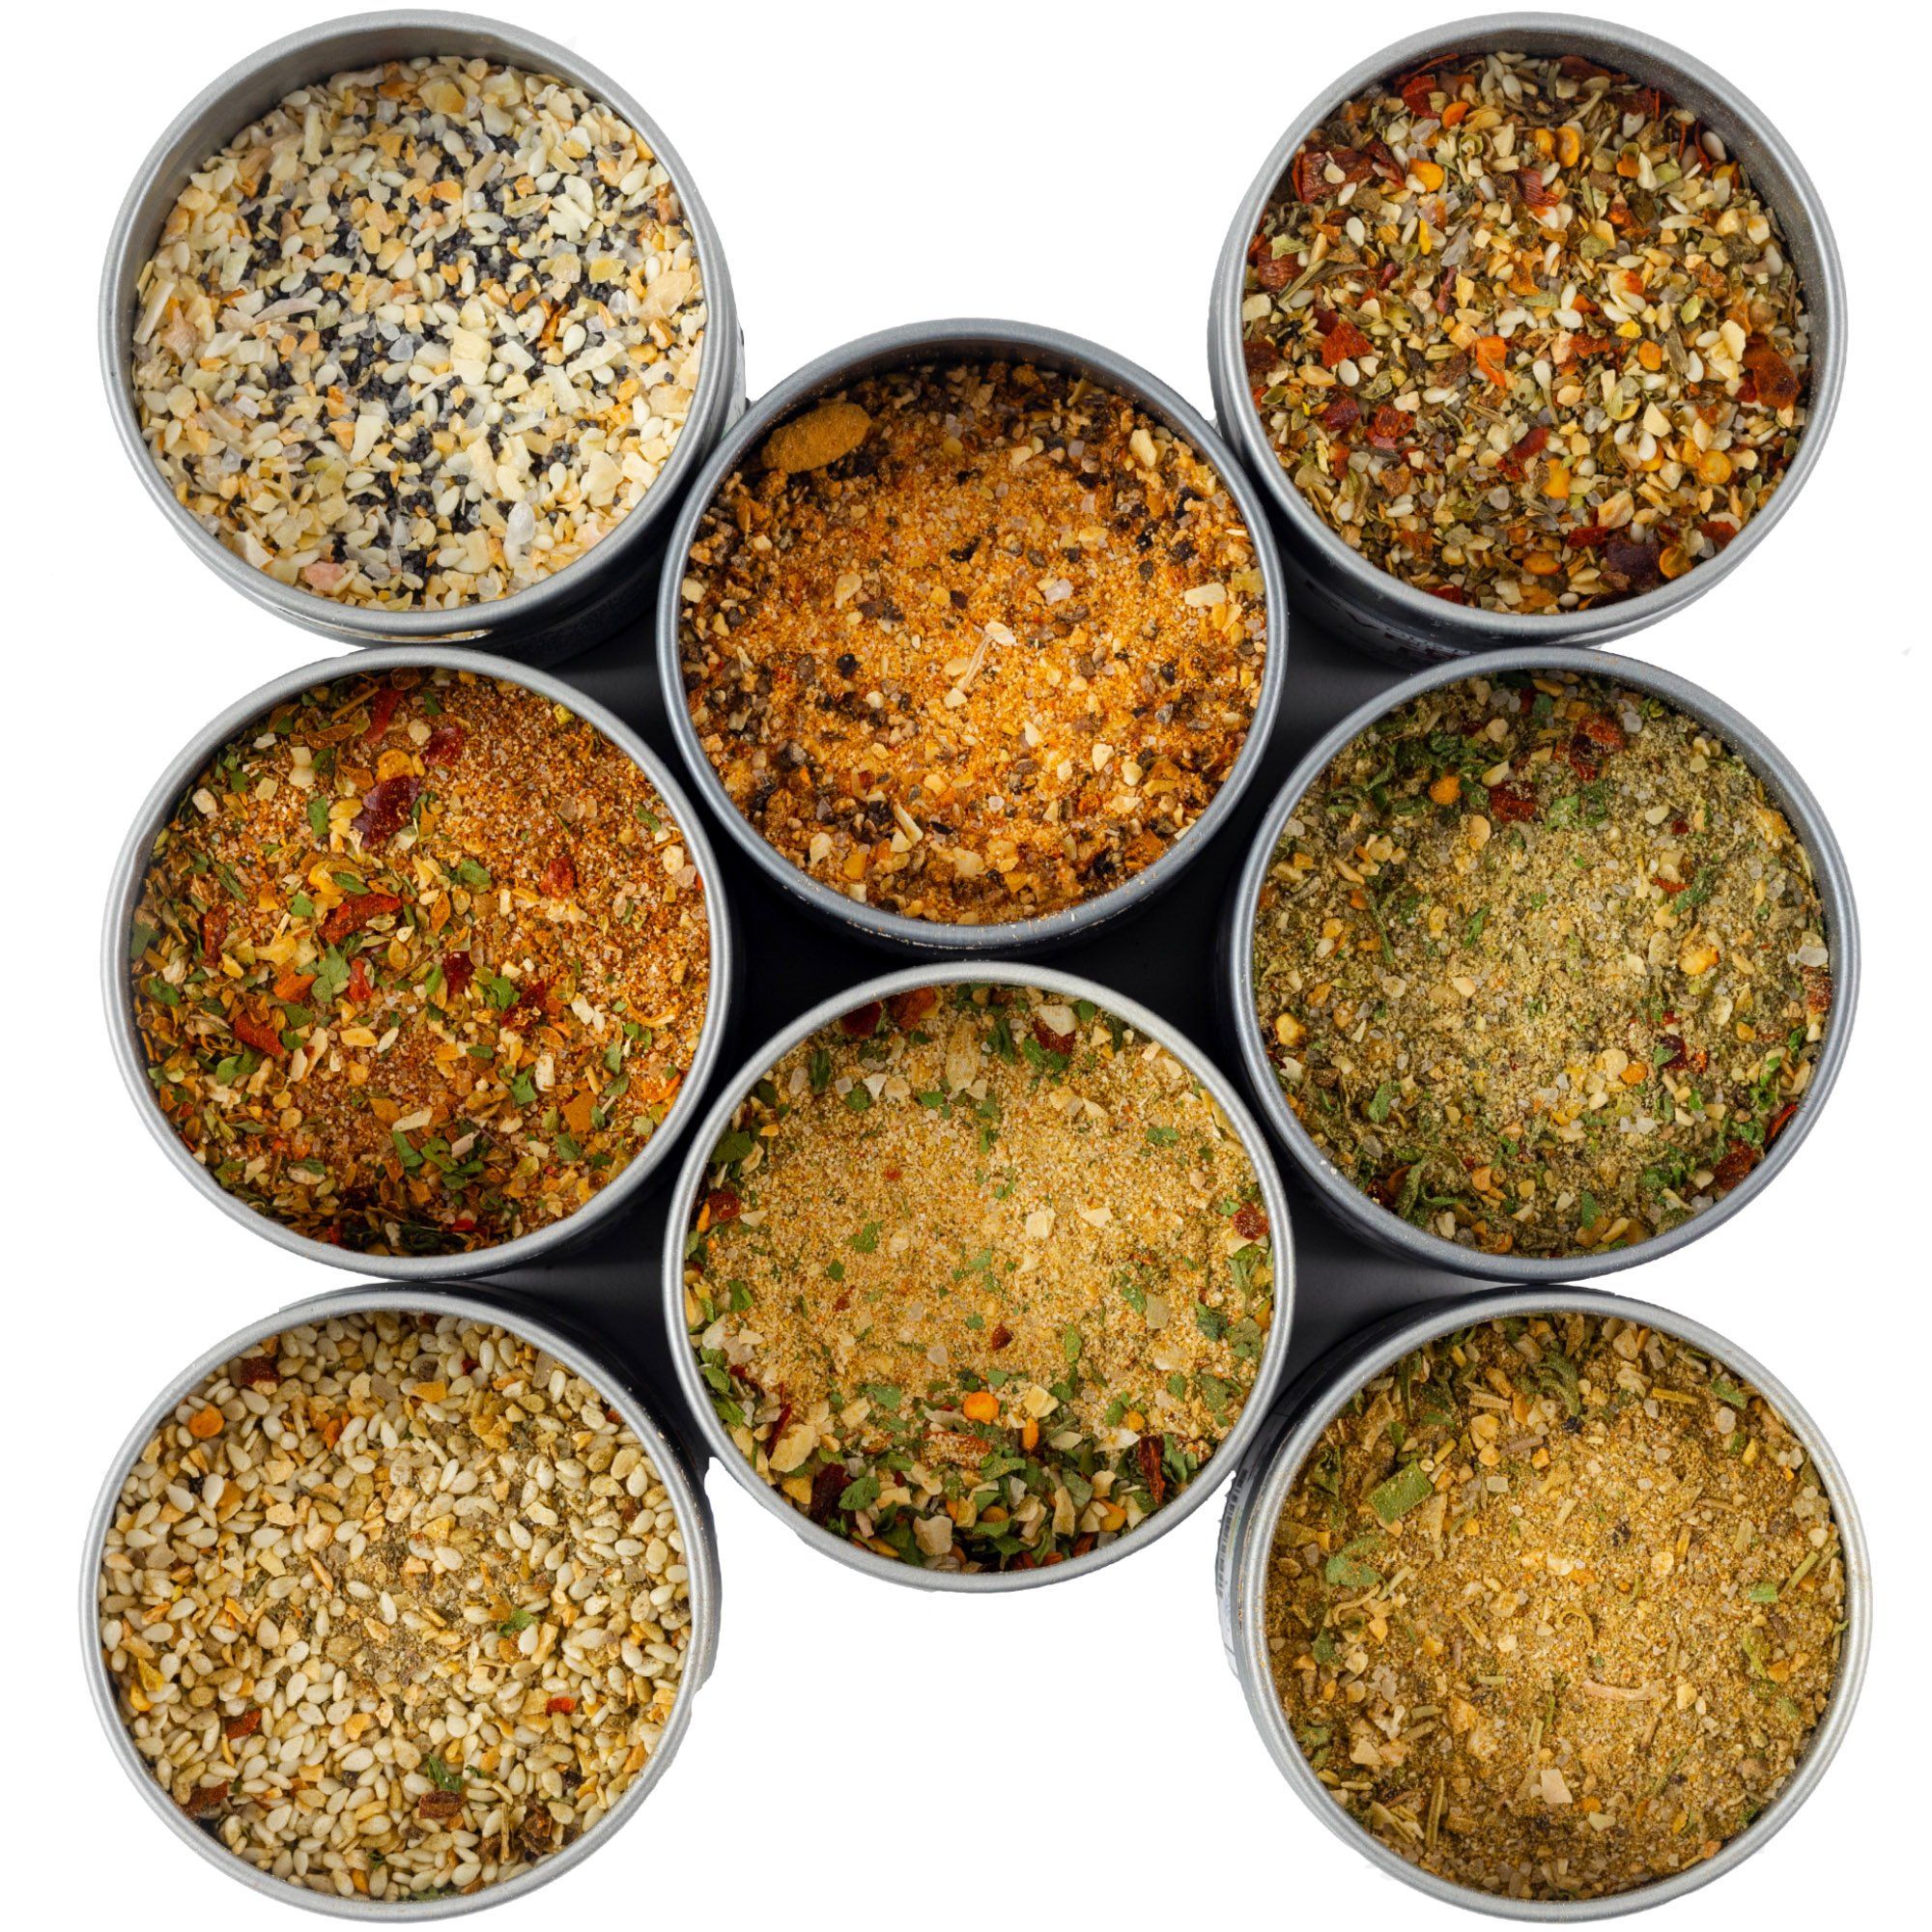 Pantry Starter Kit | Non GMO | Gourmet Spices and Salt | 8 Small Batch Herbs & Spices | Handpacked in Magnetic Tins | Gustus Vitae | #214